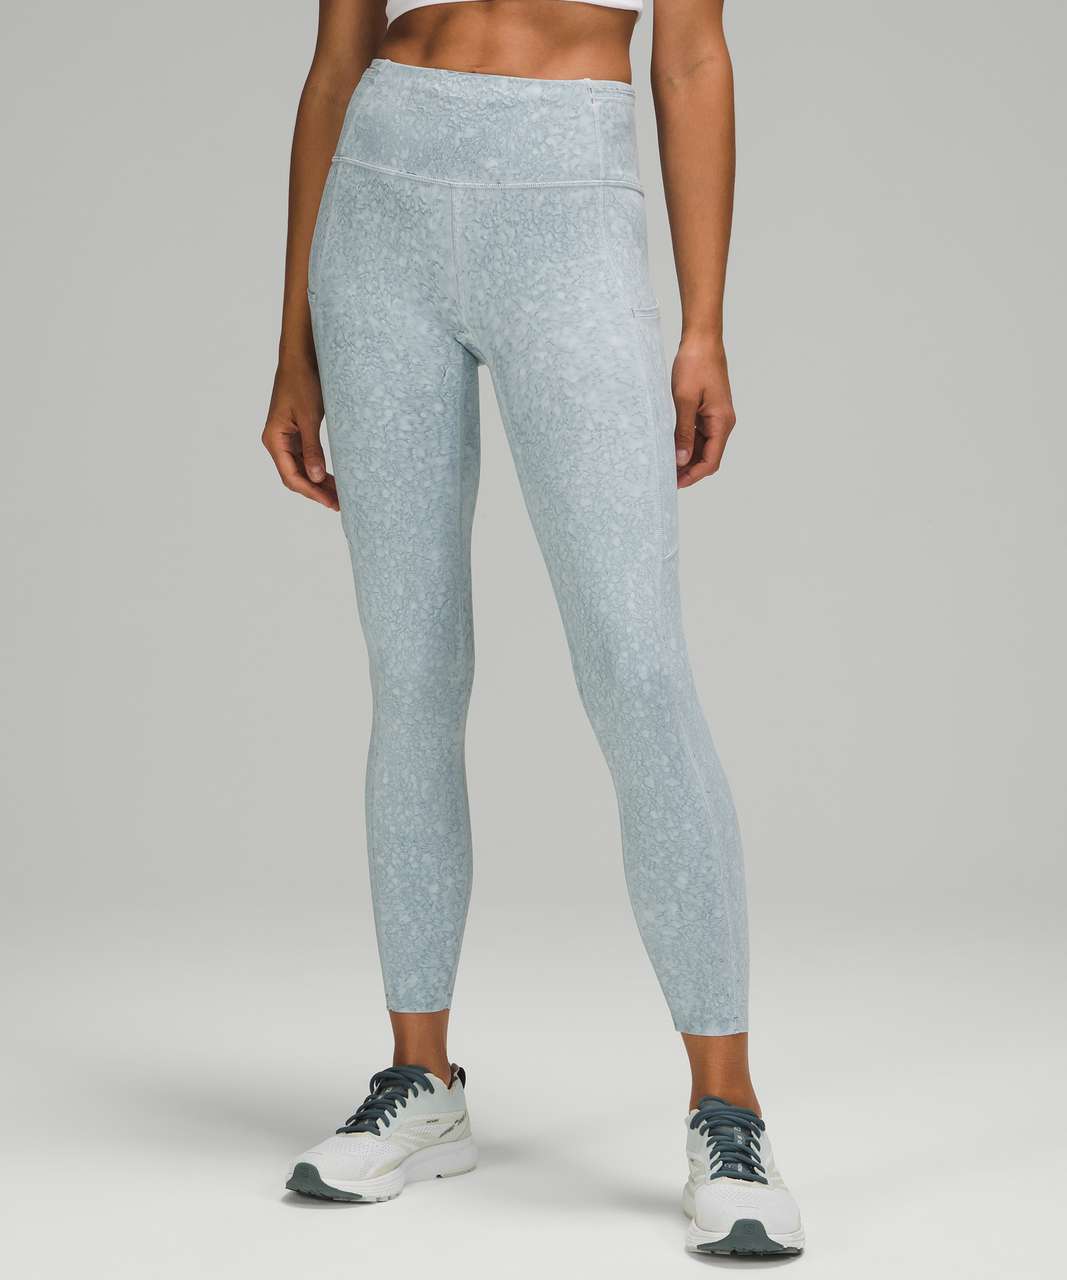 Lululemon Fast and Free Tight 25" *Nulux - City Grit White Blue Fog